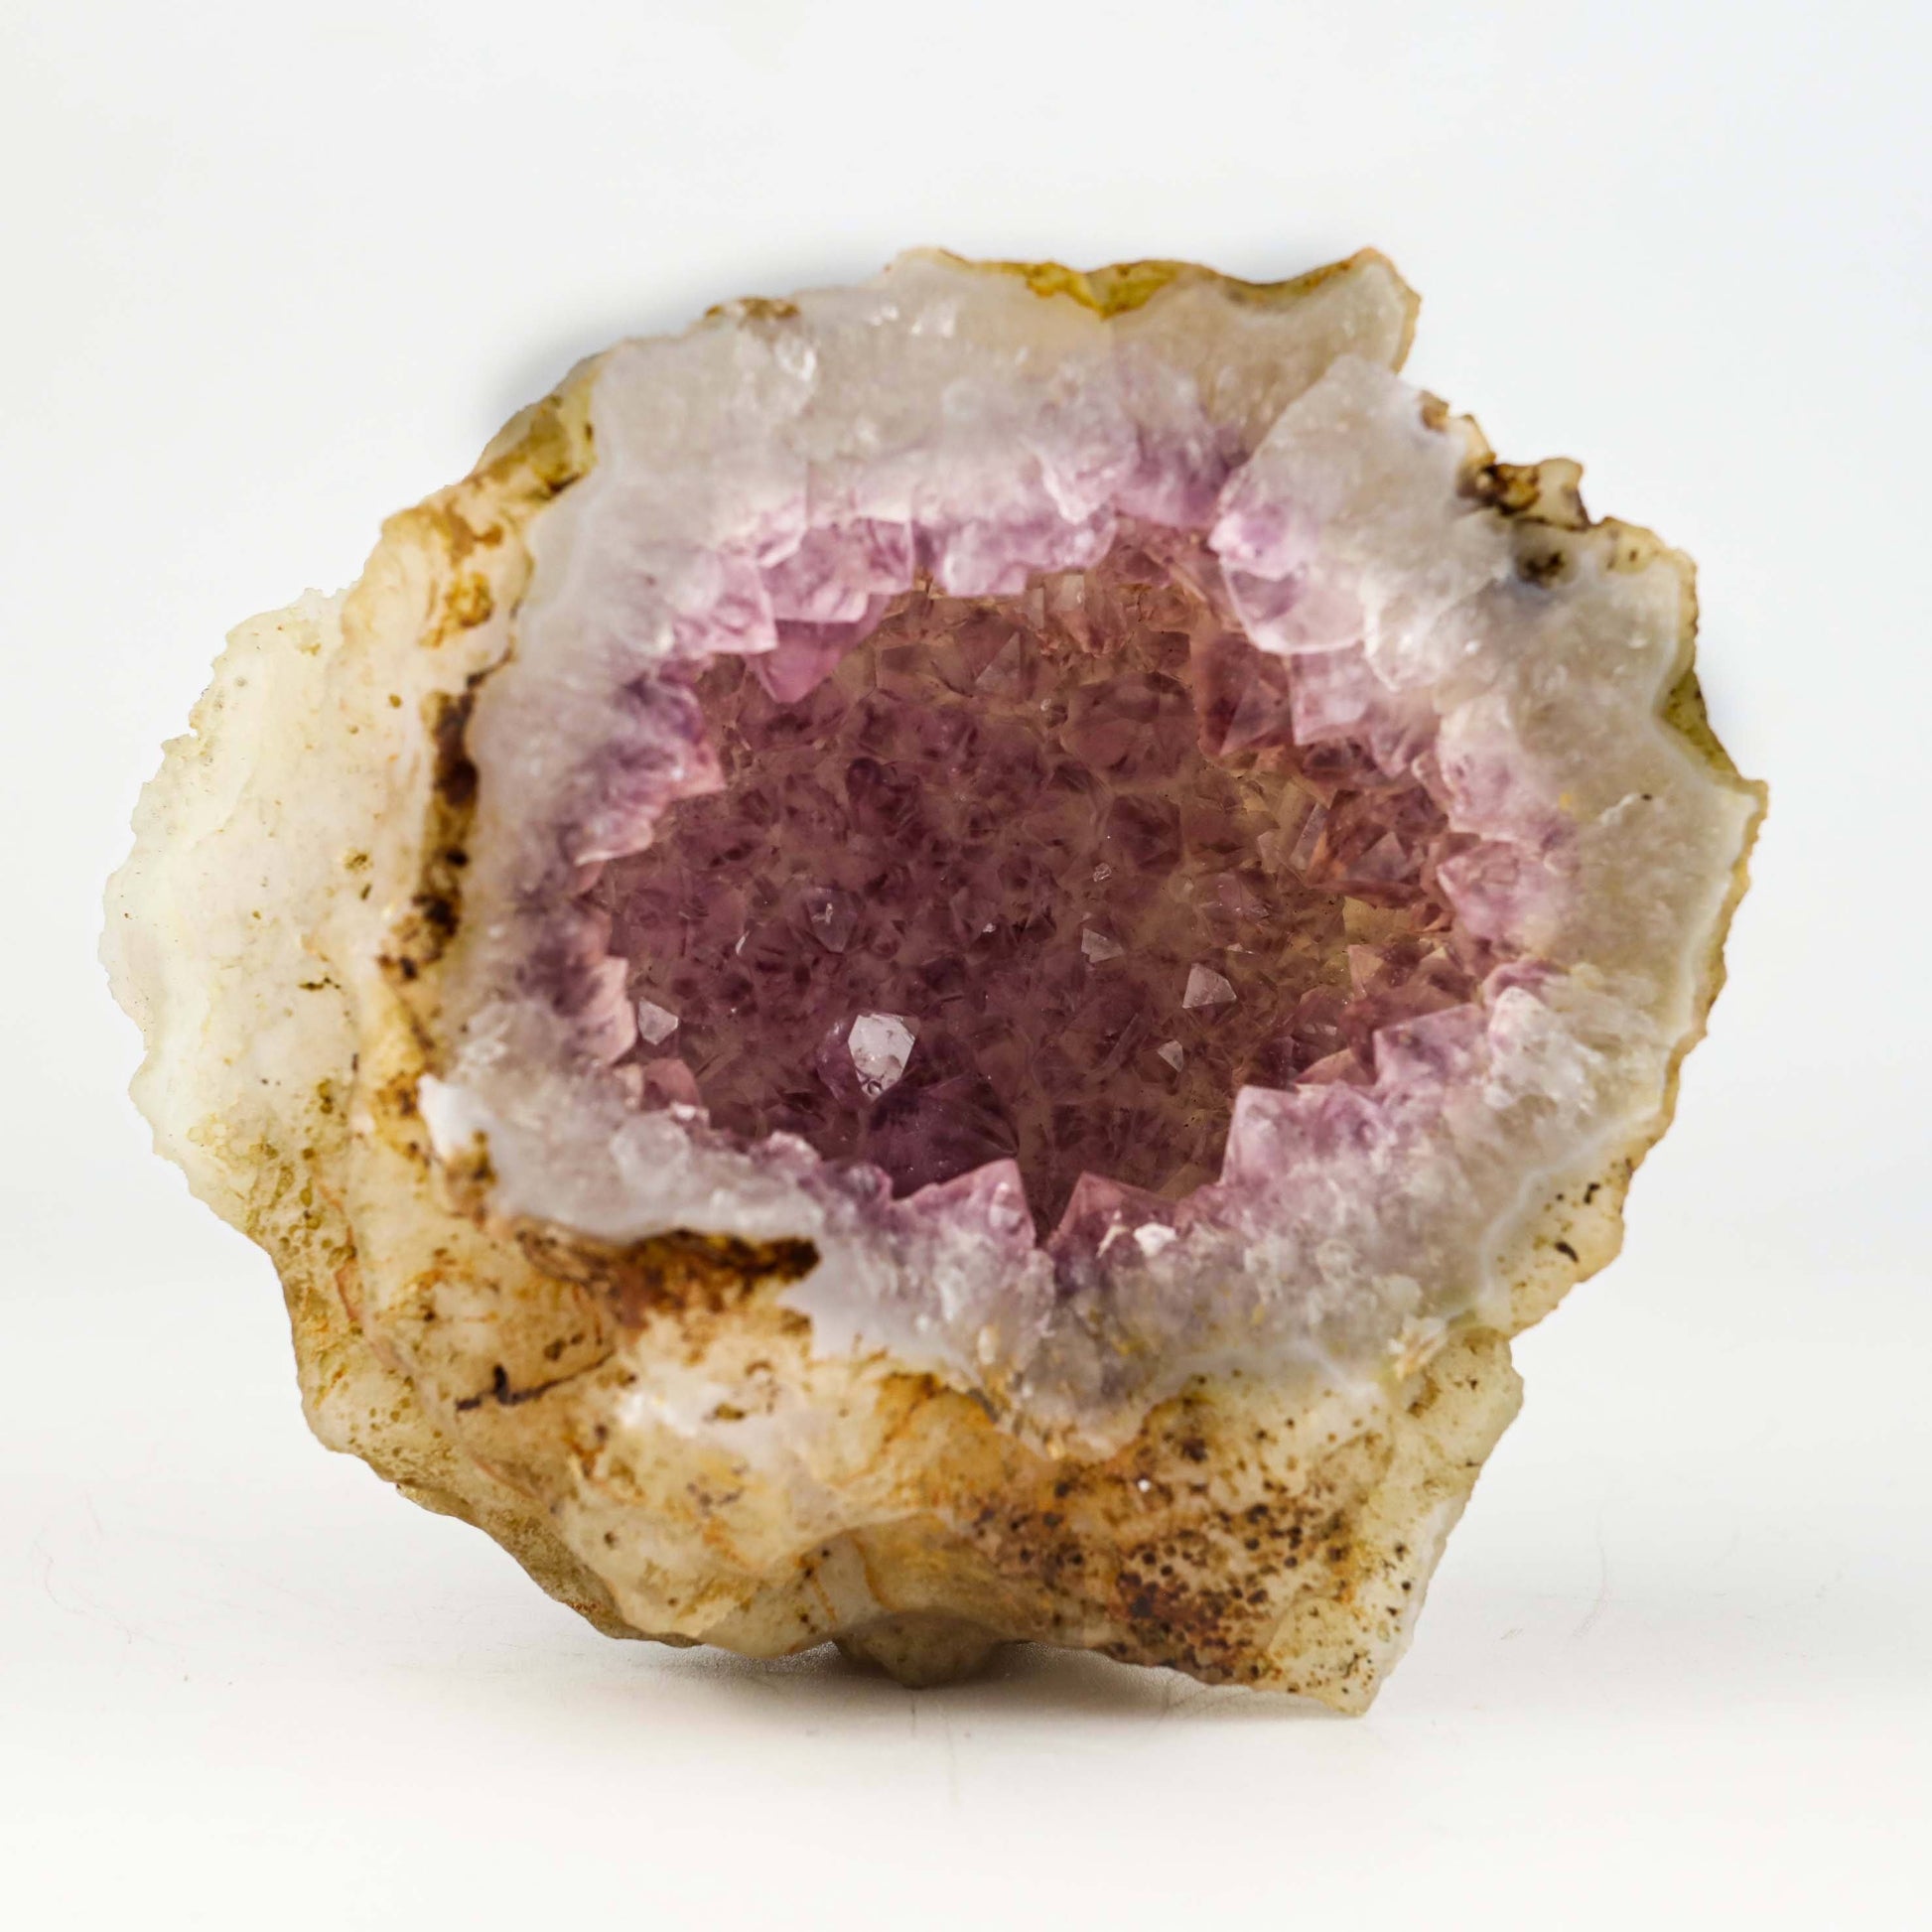 Amethyst Purple Crystals Geode (2 Halves ) Natural Mineral Specimen #…  https://www.superbminerals.us/products/amethyst-purple-crystals-geode-2-halves-natural-mineral-specimen-b-4936  Features: An extremely stylish piece highlighting two parts of an Amethyst Geode. The Amethyst crystals are on a Quartz which itself is on layers of clear, dark/blue Chalcedony. The tone, shine and differentiation is astonishing. Furthermore, to see two coordinated parts showed is an eye-catcher. 